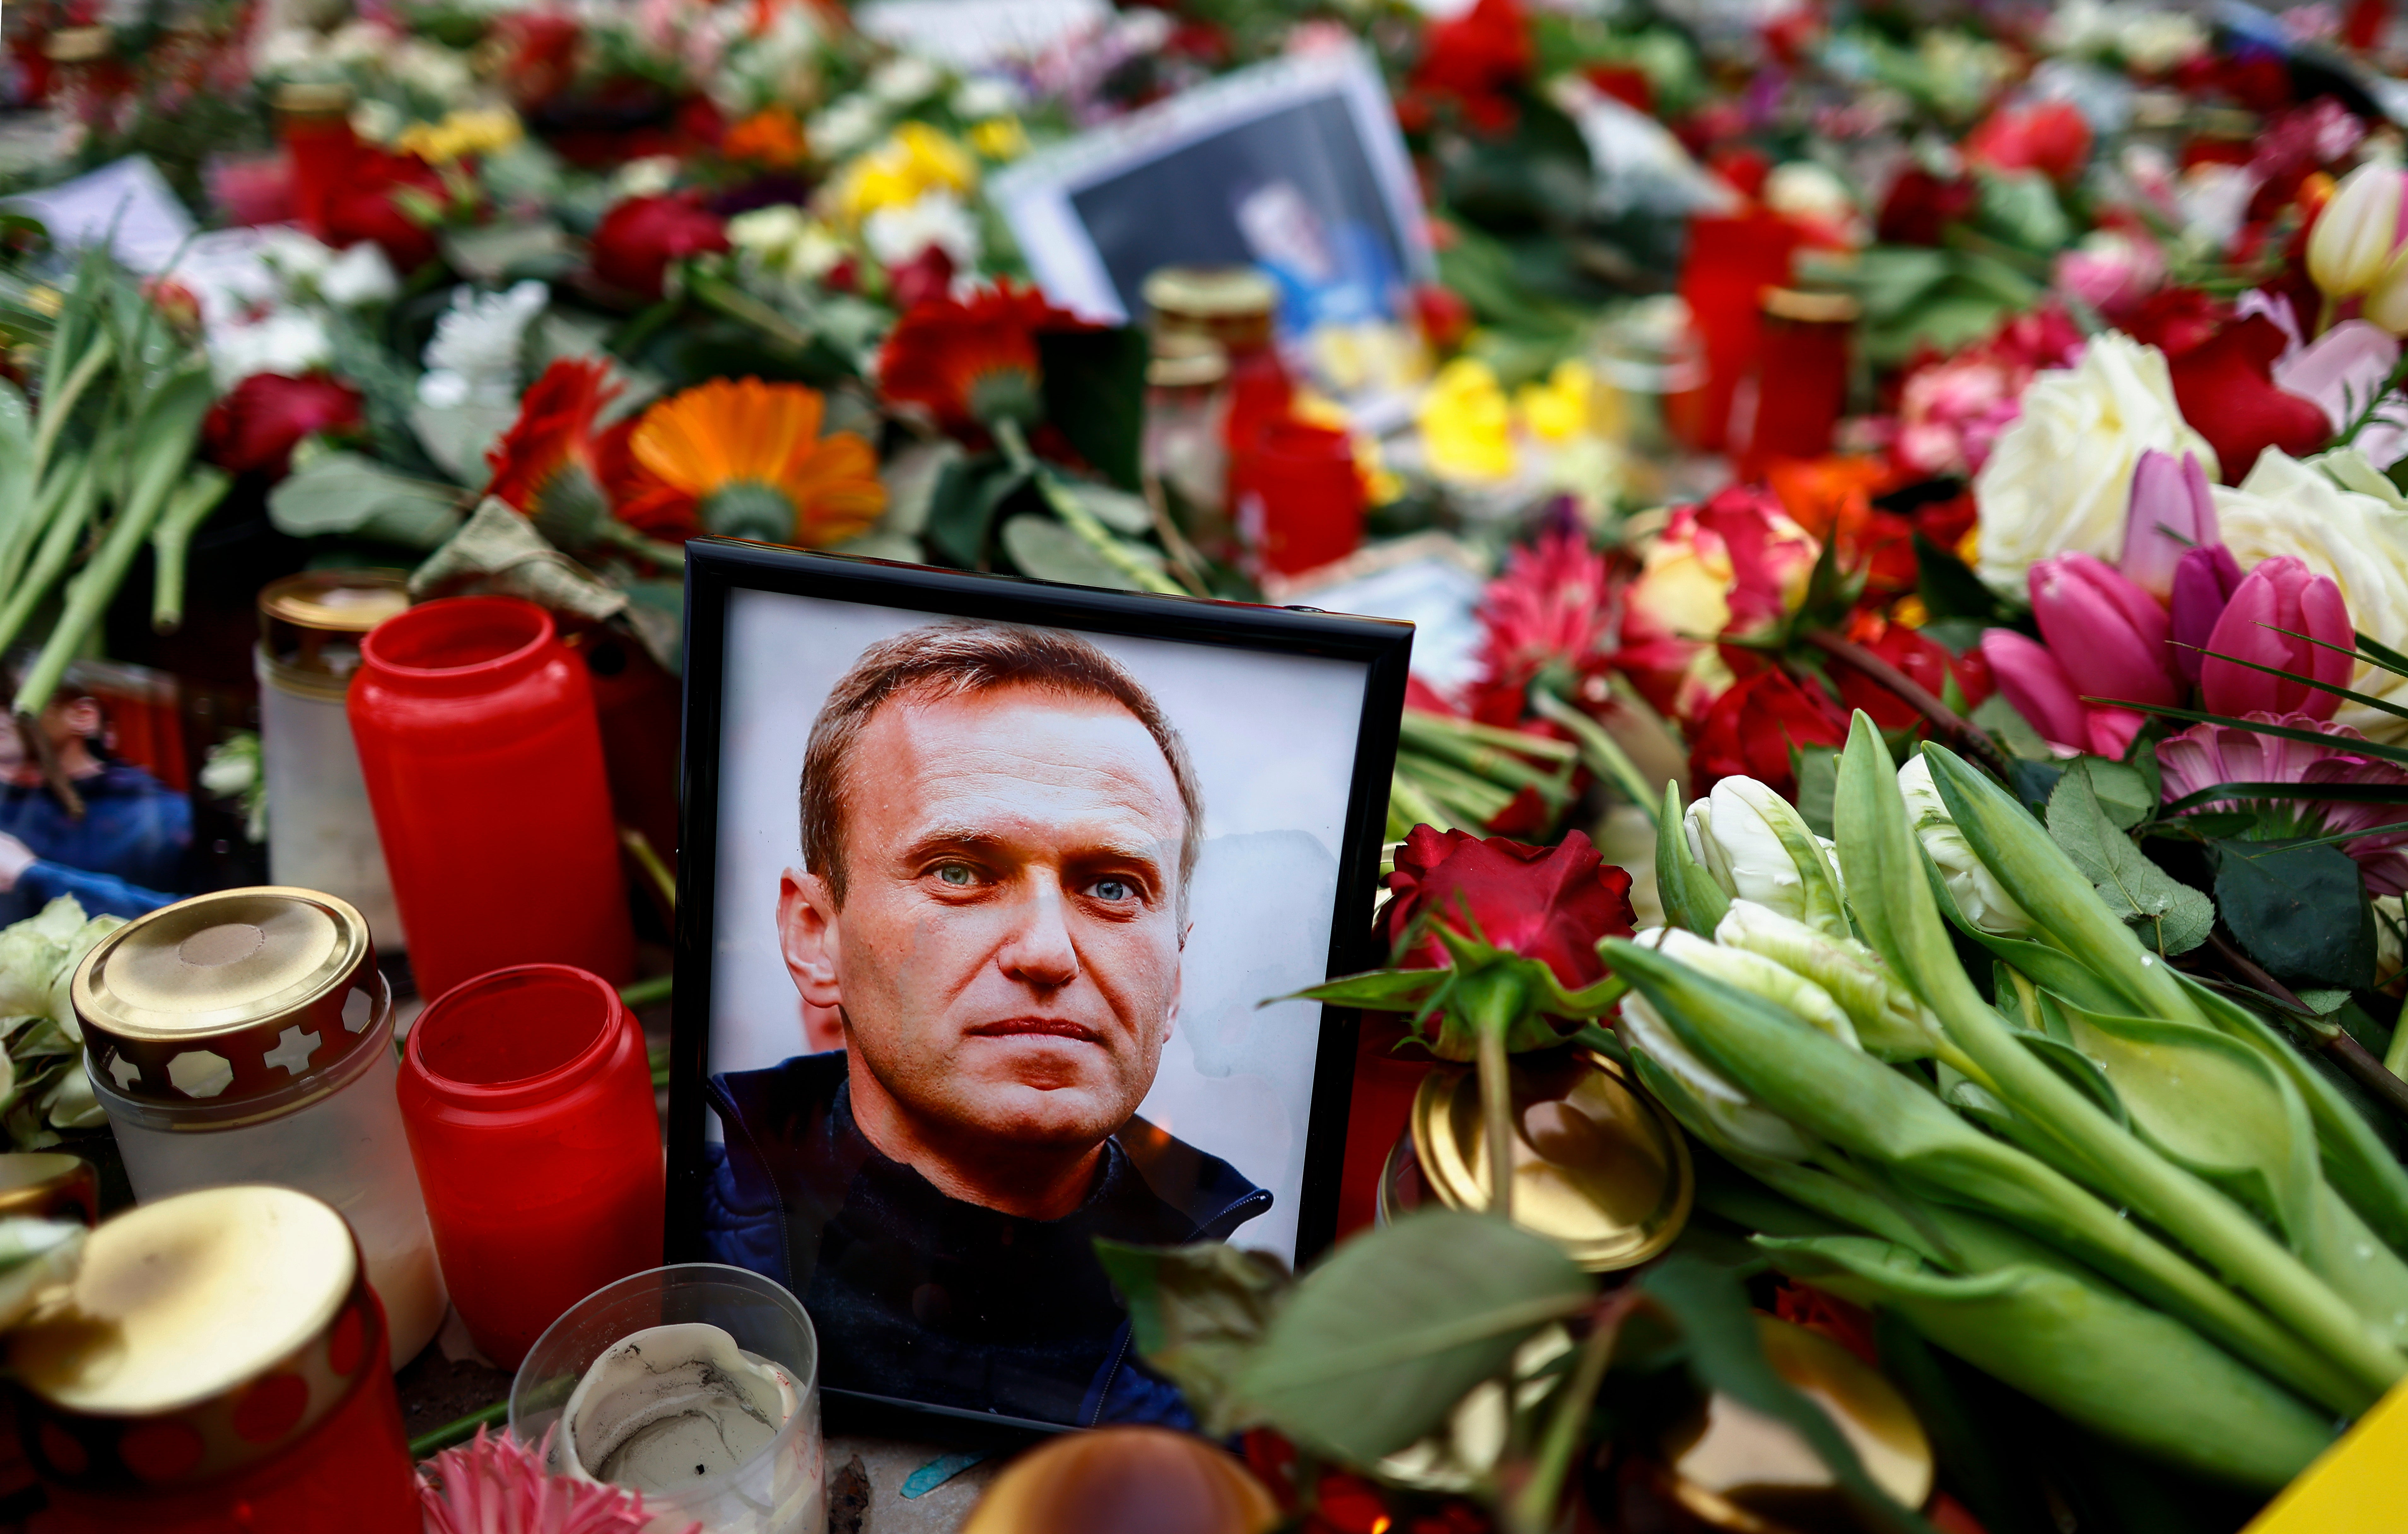 Navalny’s family and team have accused Putin and the Kremlin of murdering him